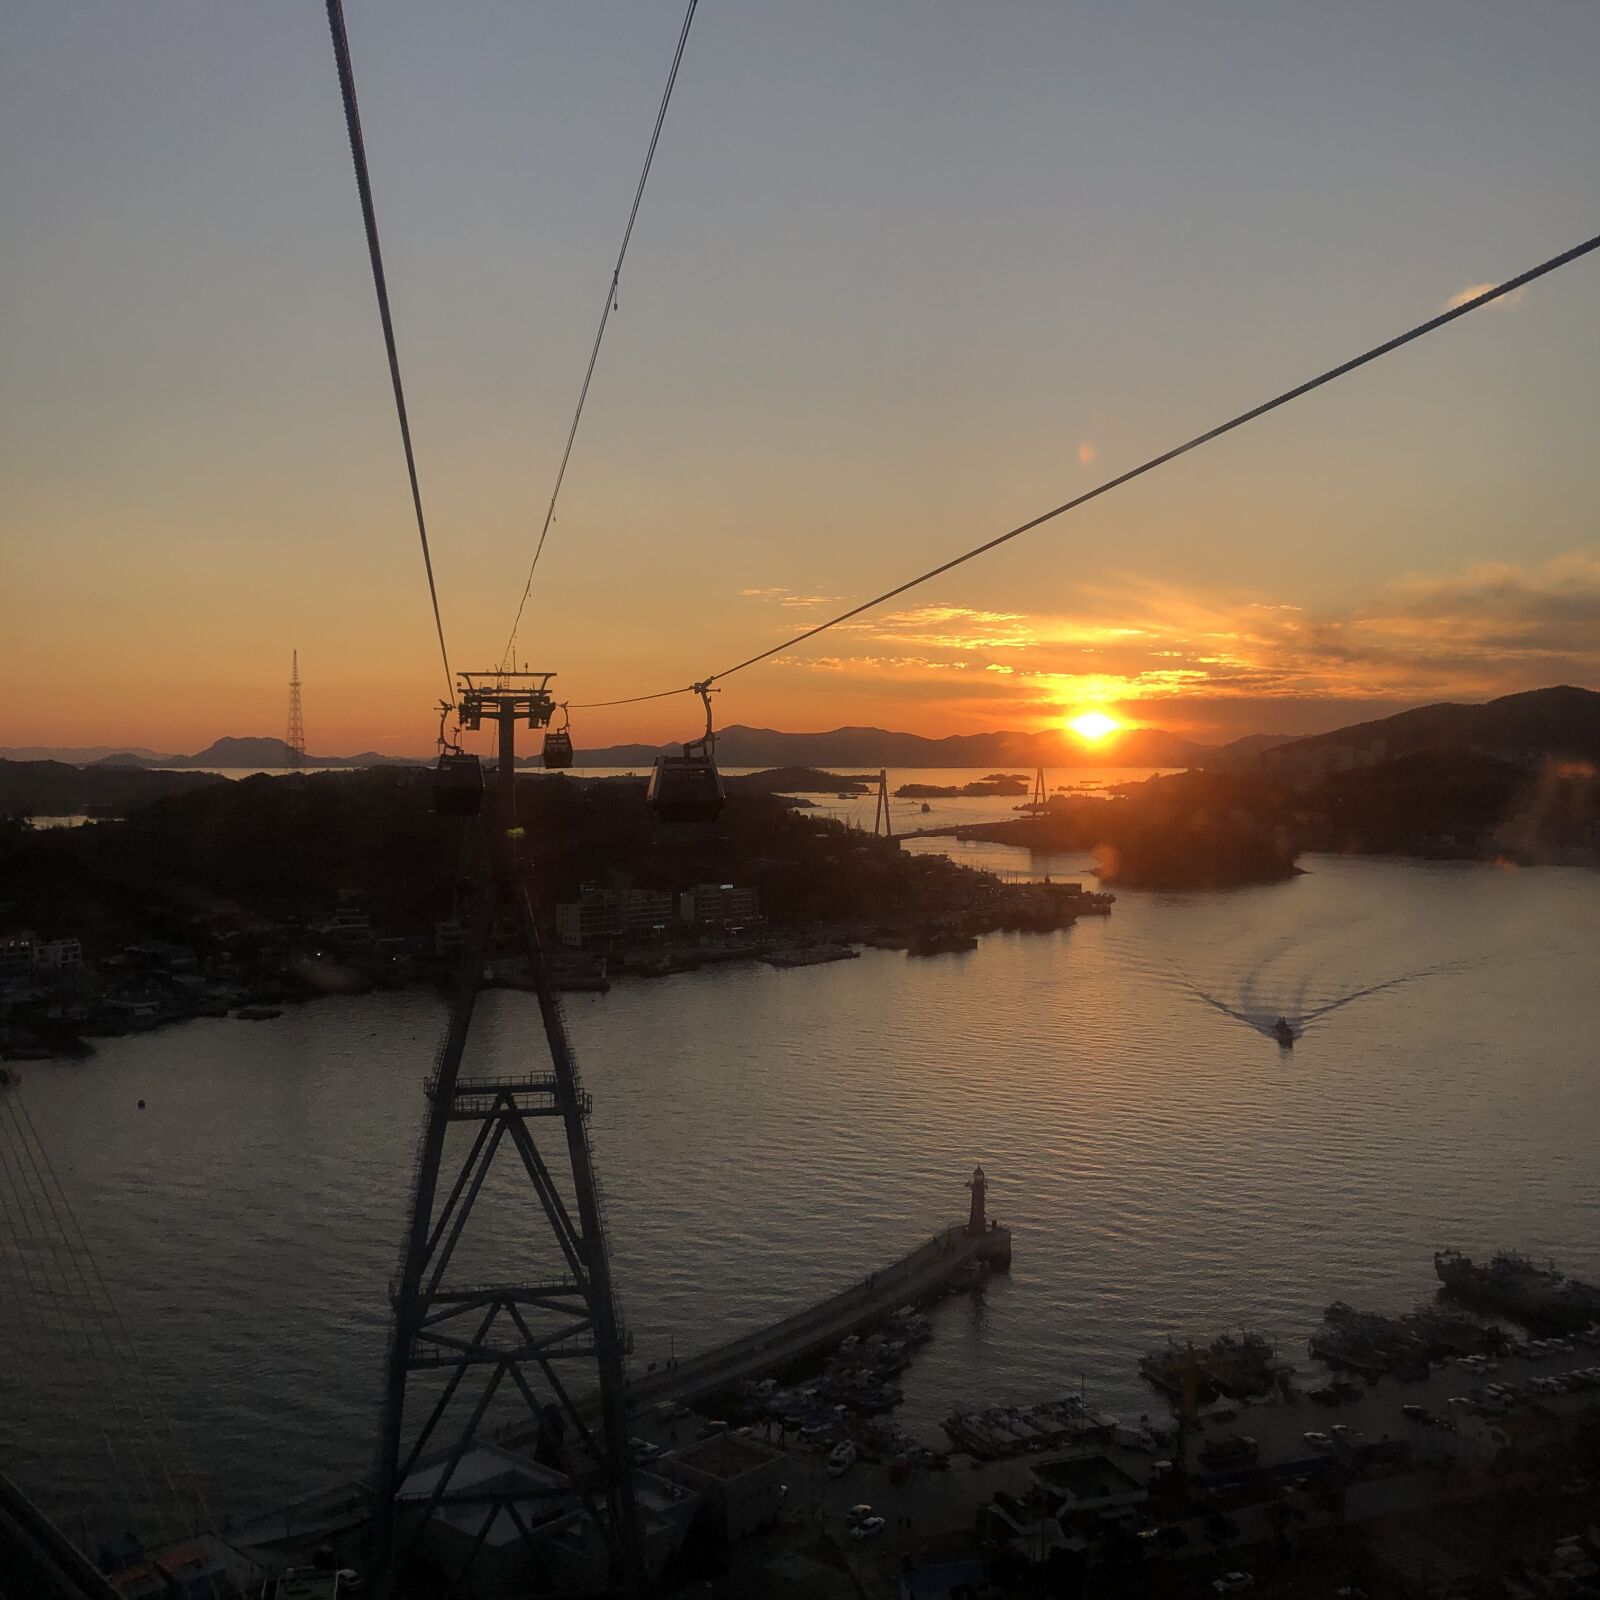 Apple iPhone 8 sample photo. Sunset, the cable car photography